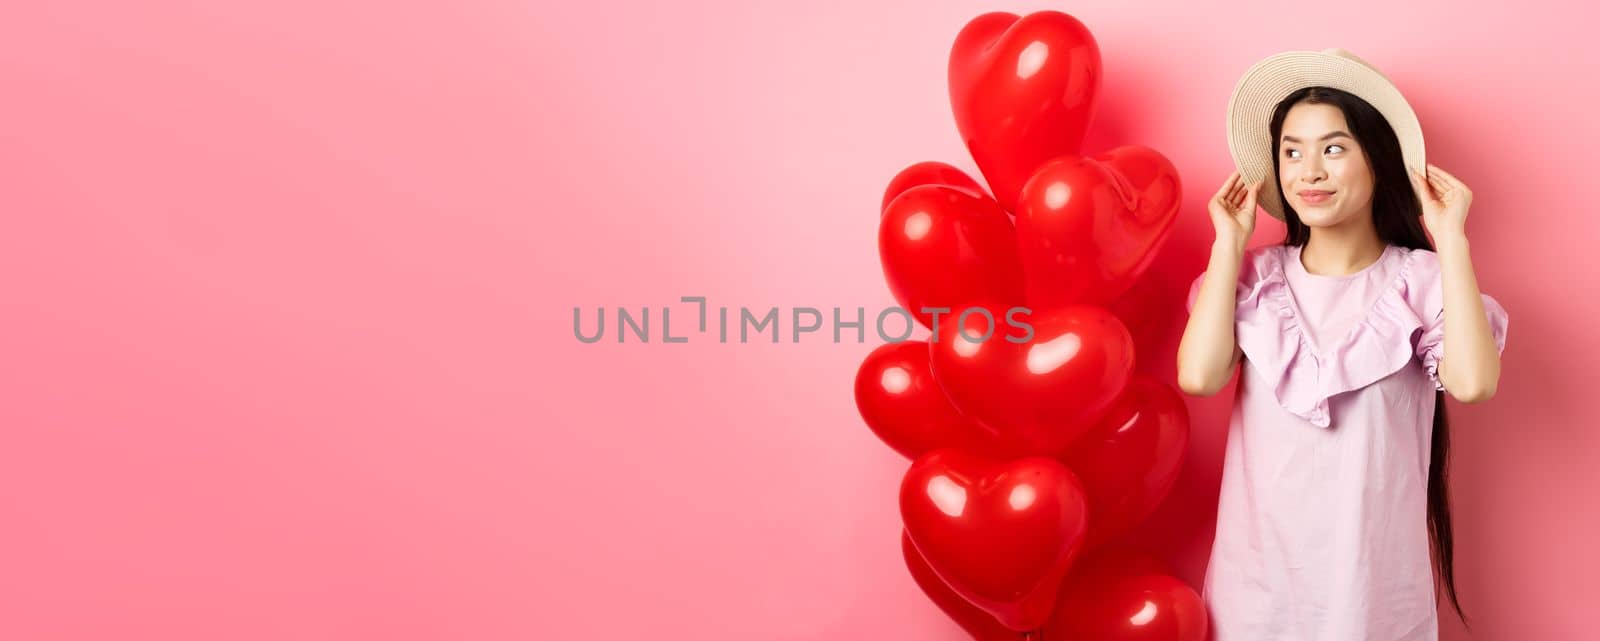 Tender and romantic asian teen girl wearing straw hat and dress on date, standing near valentines day heart balloons and looking aside with dreamy smile, pink background.